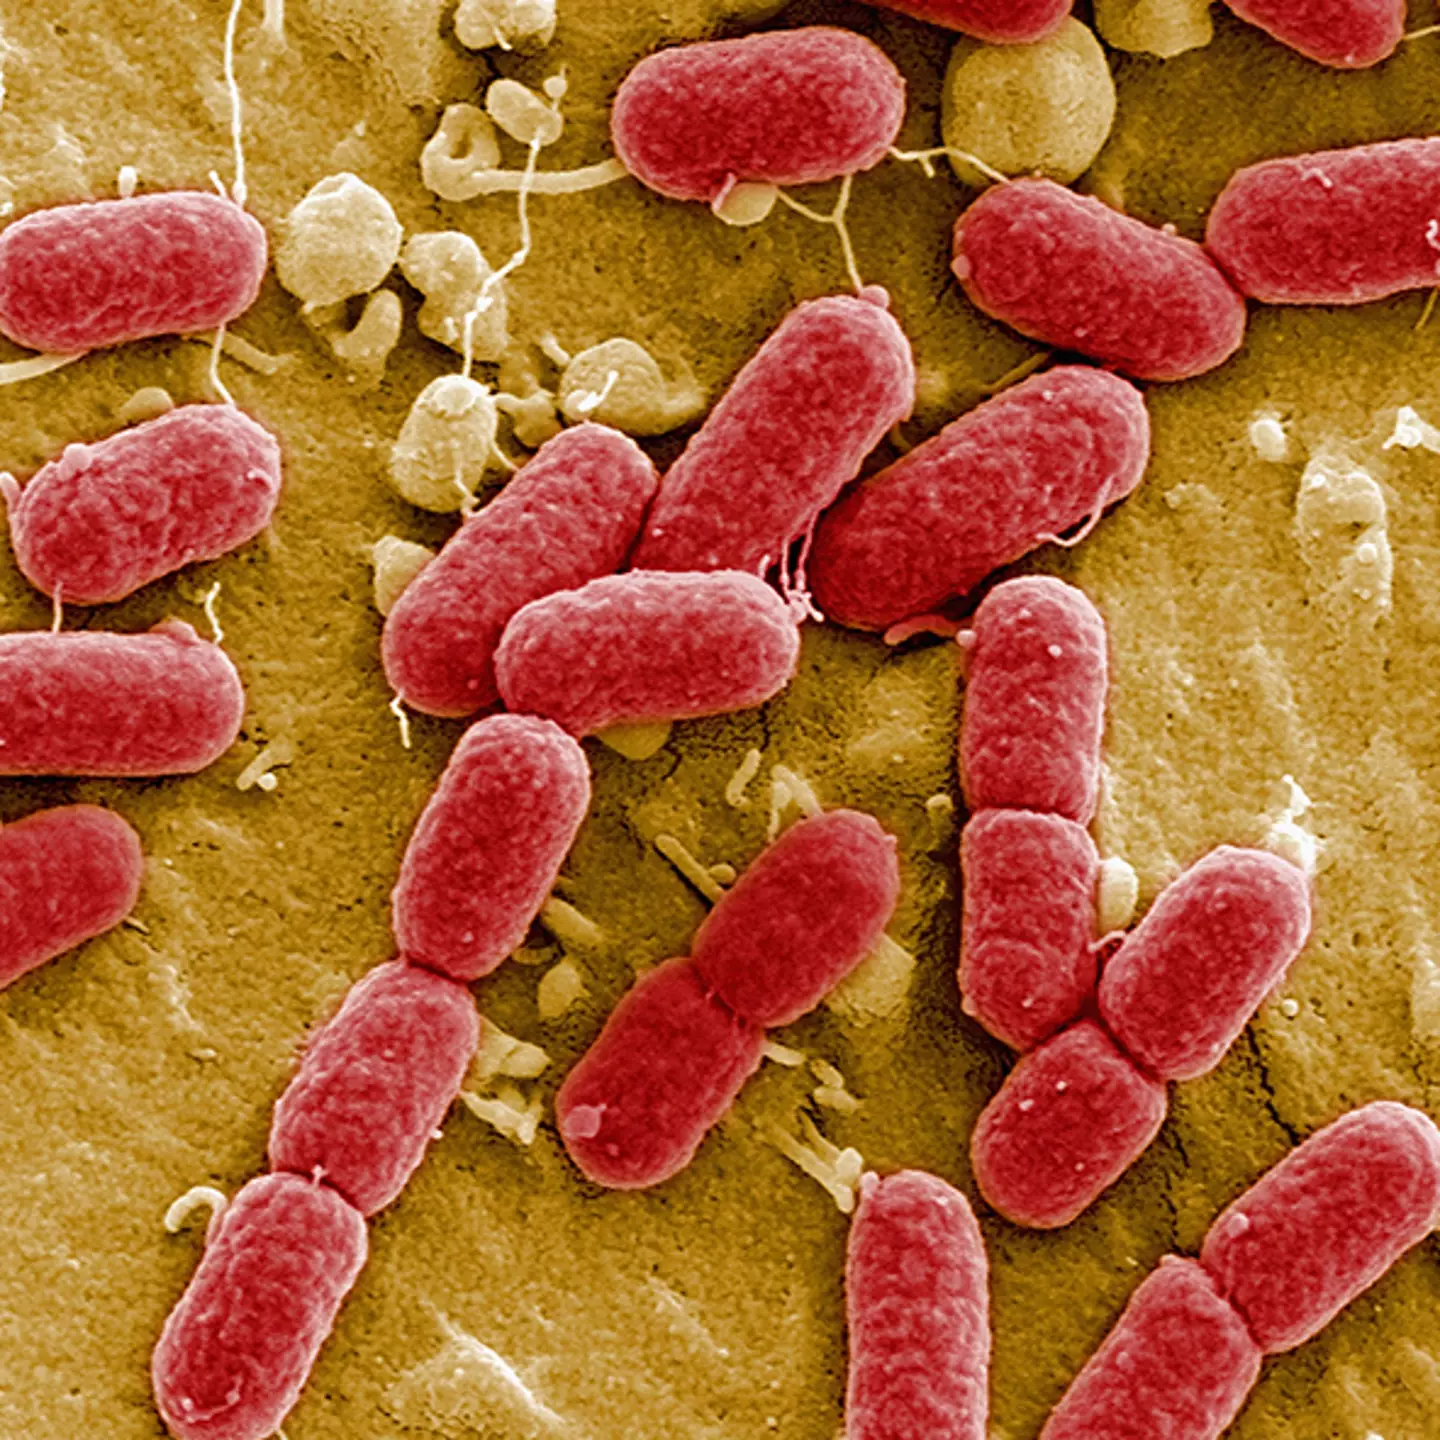 Scientists hail new antibiotic that can kill drug-resistant bacteria